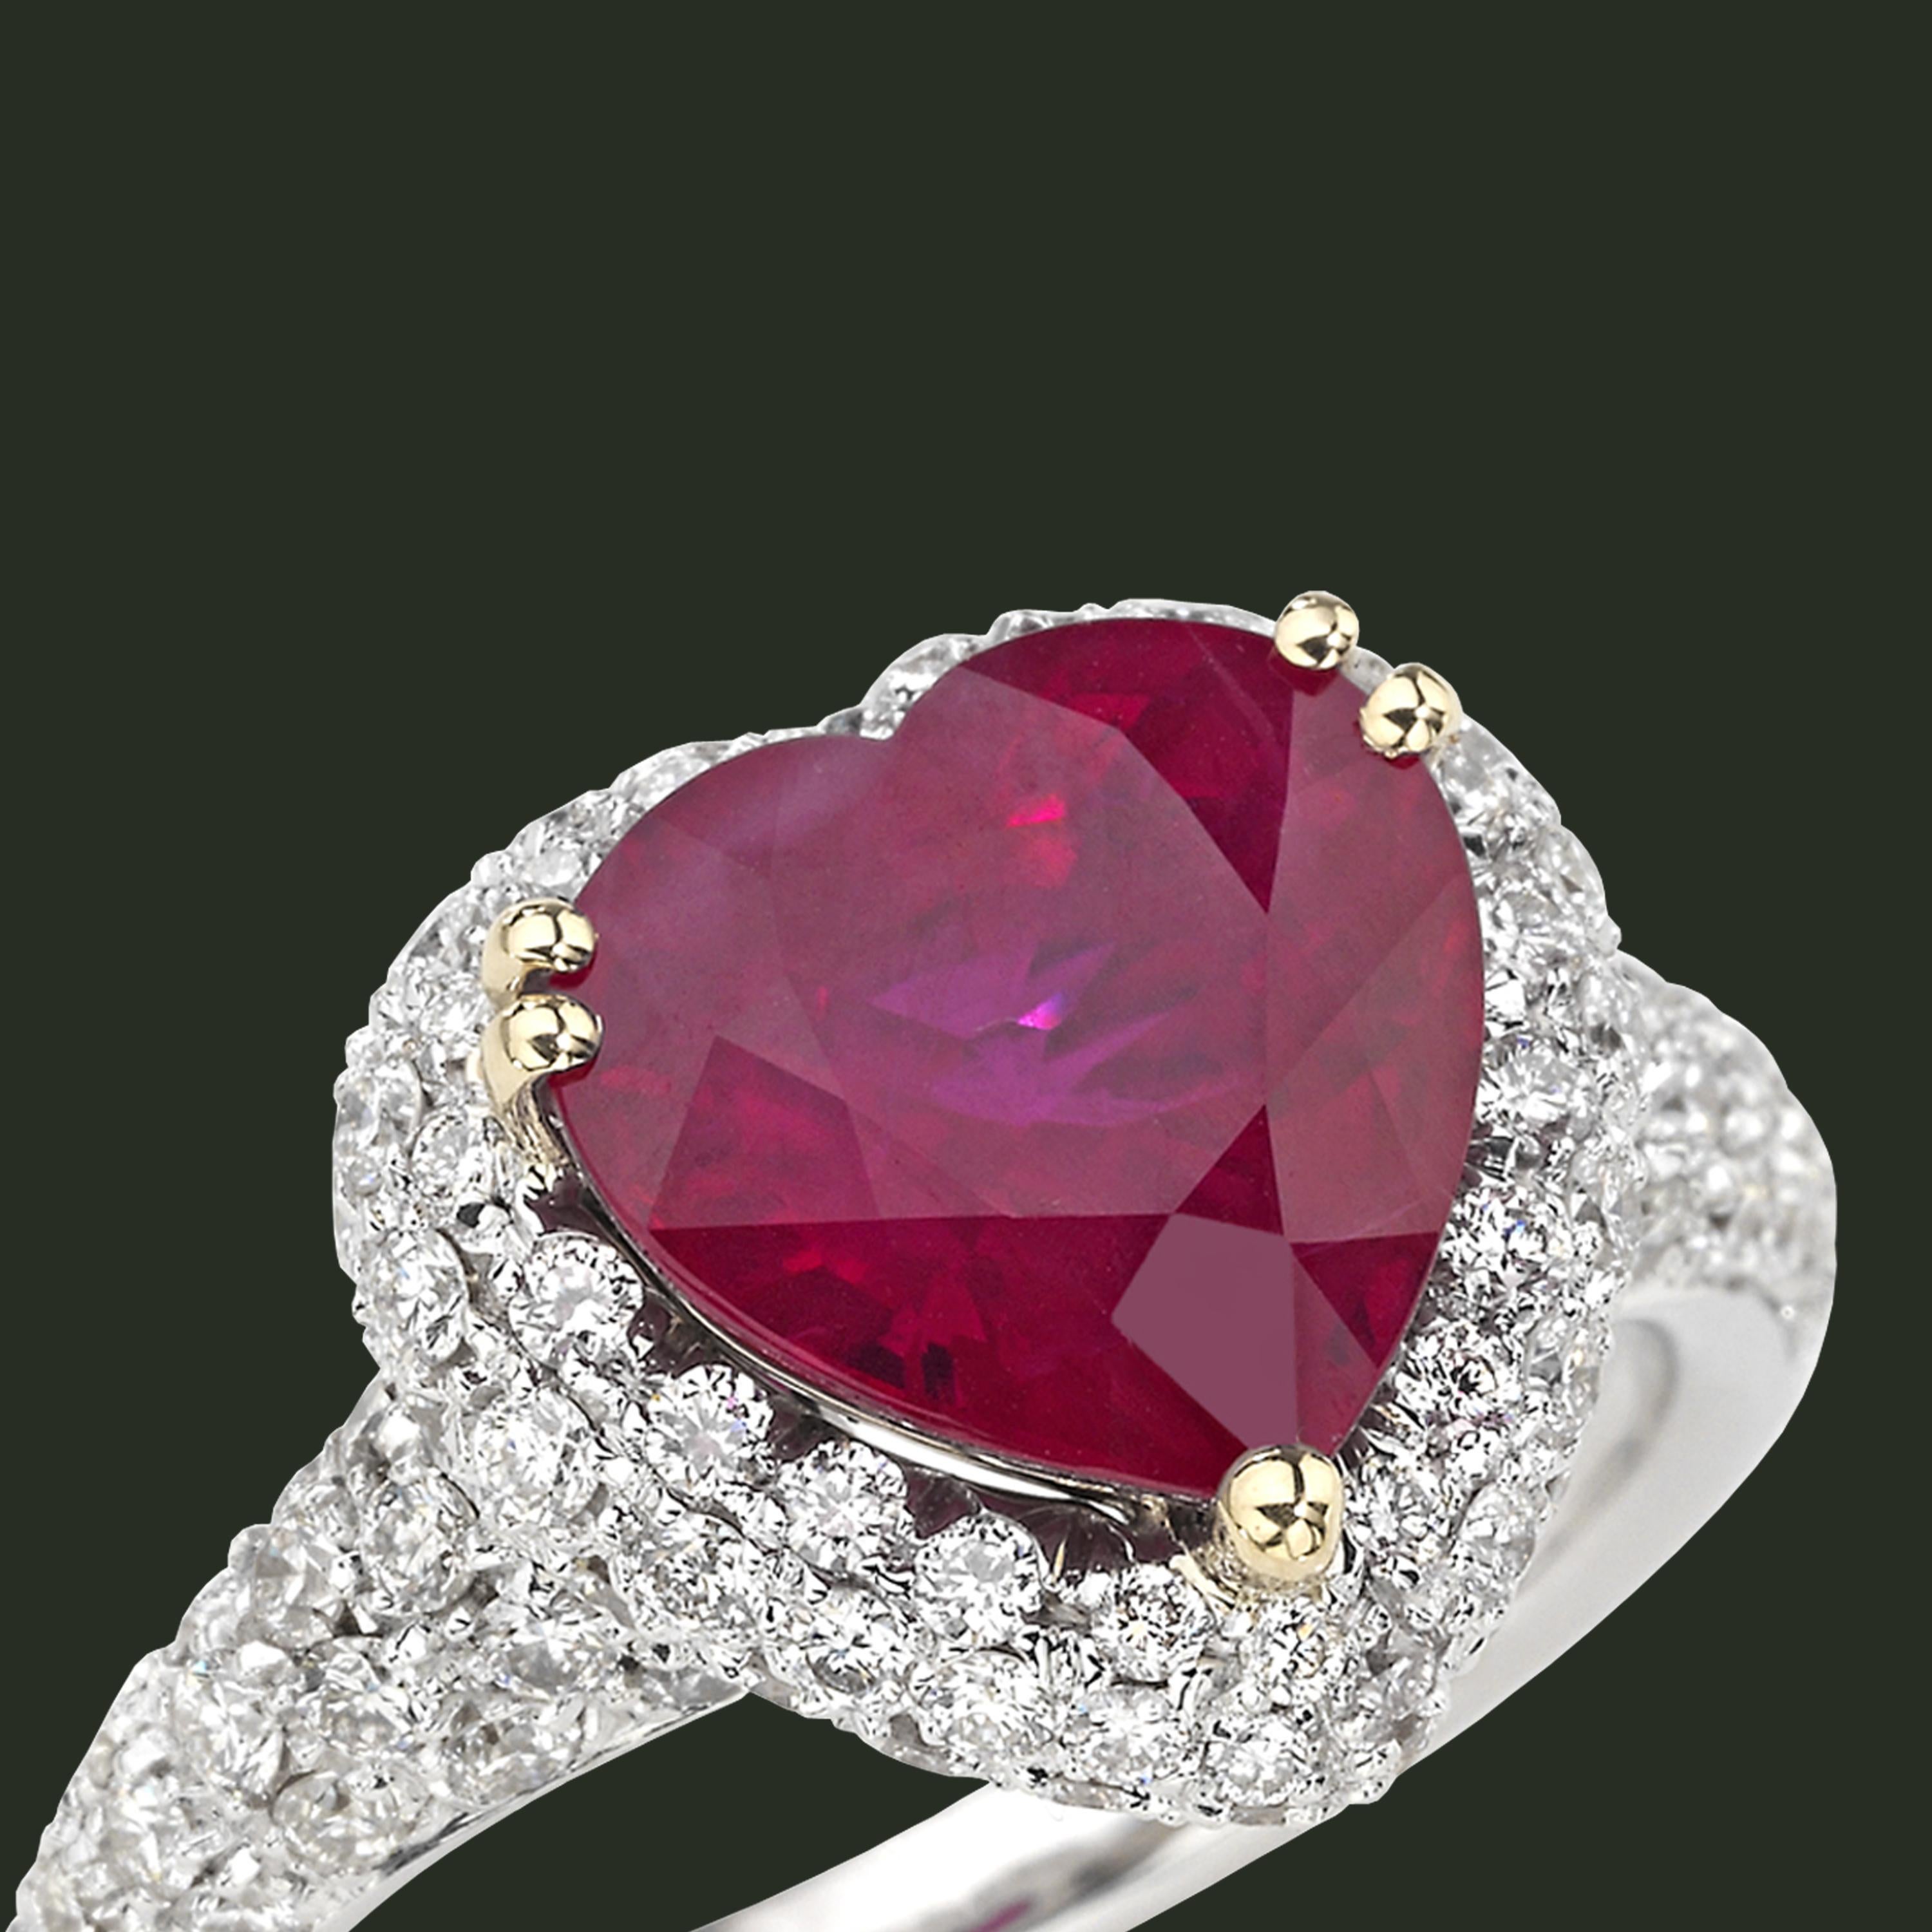 A heart-shape Ruby is the focus of this dazzling ring, that is the ultimate expression of Picchiotti’s sophisticated design combined with the use of the finest raw materials and unsurpassable craftsmanship.

Round diamonds 1.55 carats F/G color -